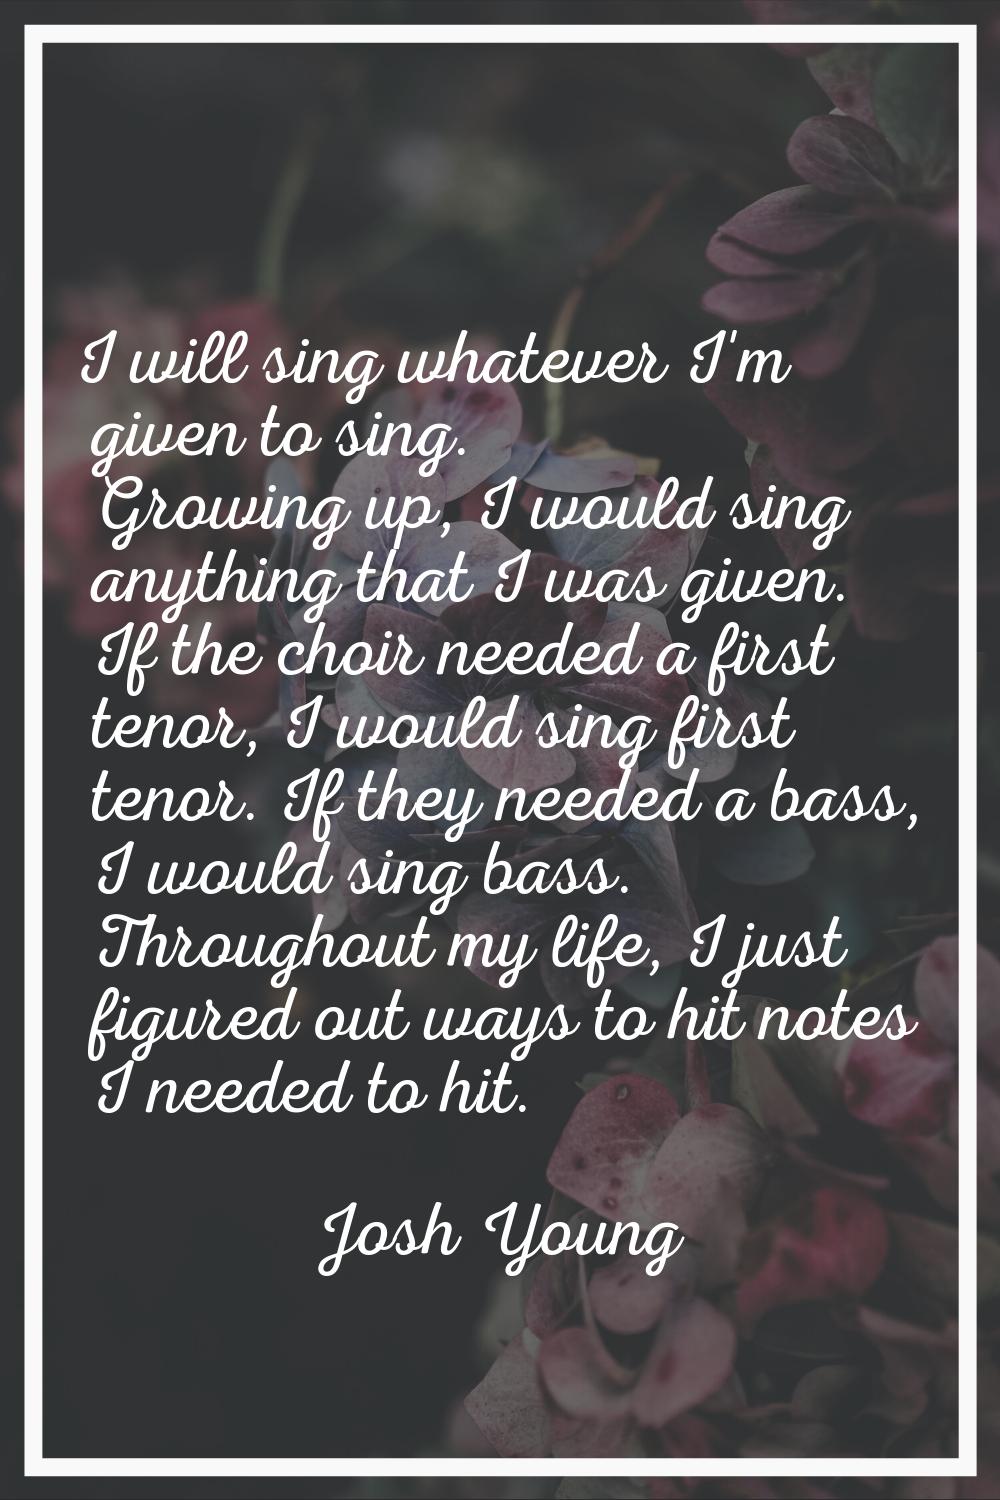 I will sing whatever I'm given to sing. Growing up, I would sing anything that I was given. If the 